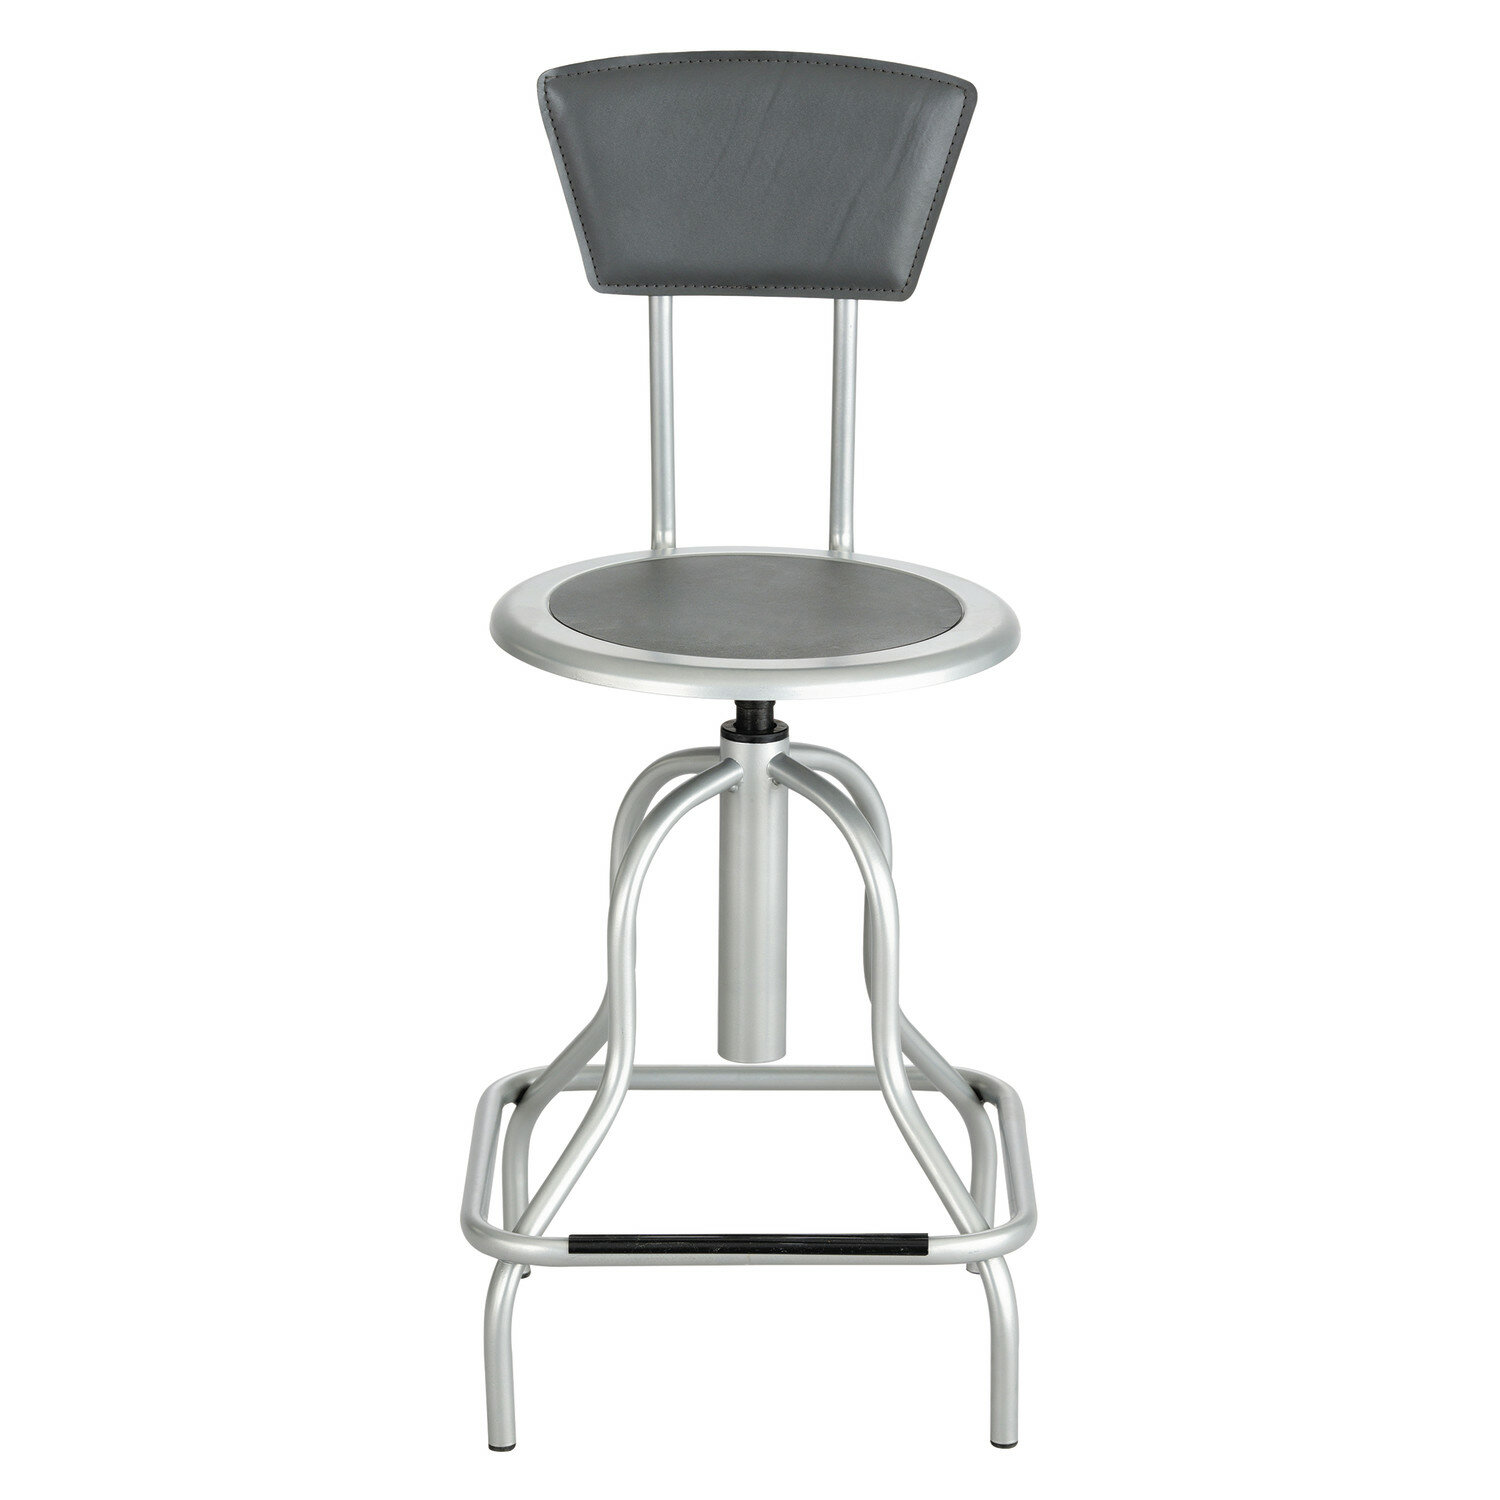 Red Safco Products Steel Stool Standard Height 